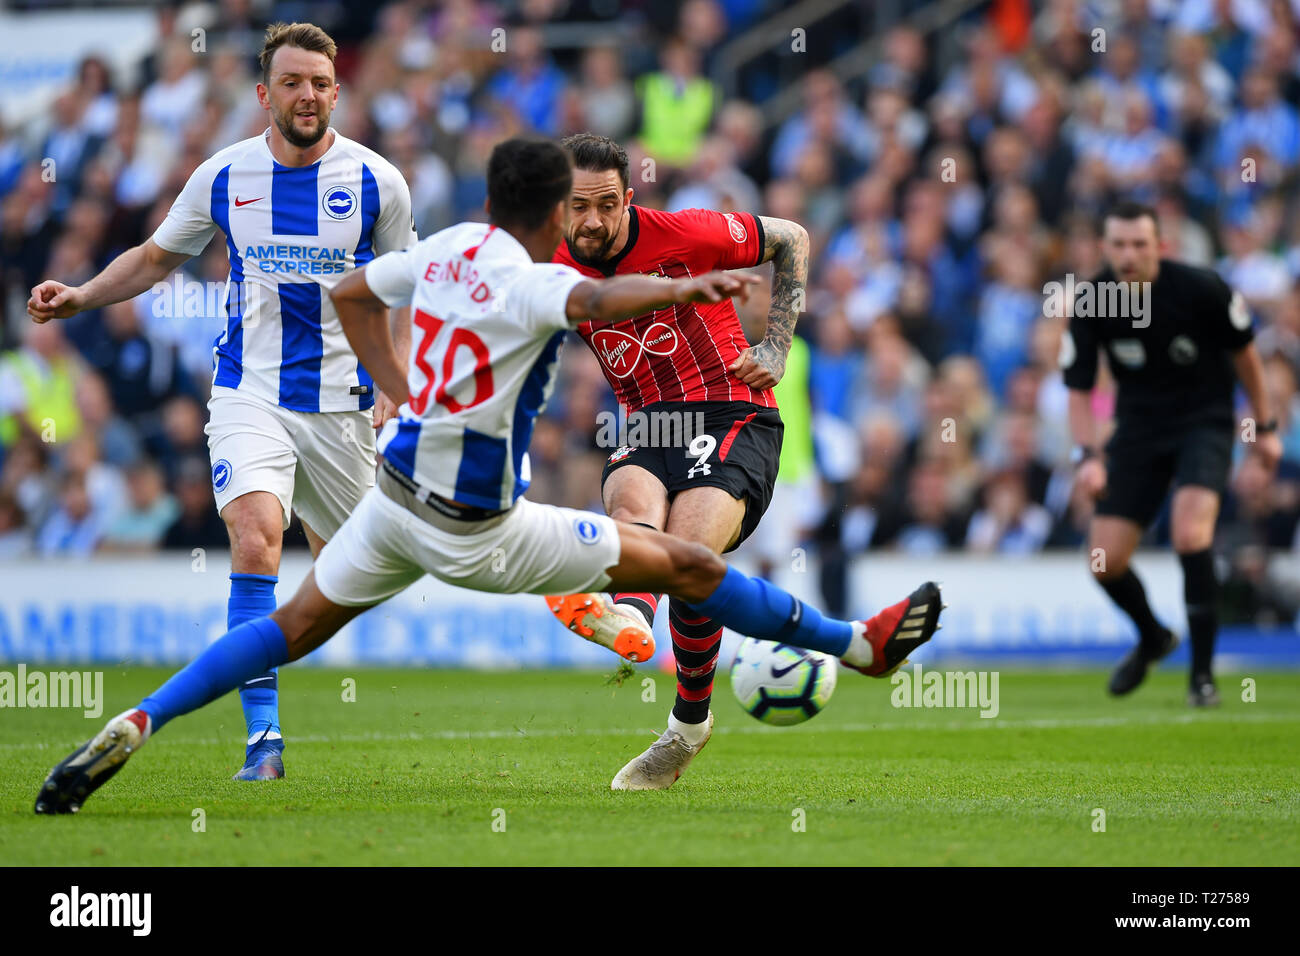 Brighton, UK. 30th March 2019.  Brighton defender Bernardo Fernandes da Silva Junior attempts to block a shot from Southampton forward Danny Ings during the Premier League match between Brighton and Hove Albion and Southampton  Editorial use only, license required for commercial use. No use in betting, games or a single club/league/player publications. Photograph may only be used for newspaper and/or magazine editorial purposes. May not be used for publications involving 1 Credit: MI News & Sport /Alamy Live News Stock Photo